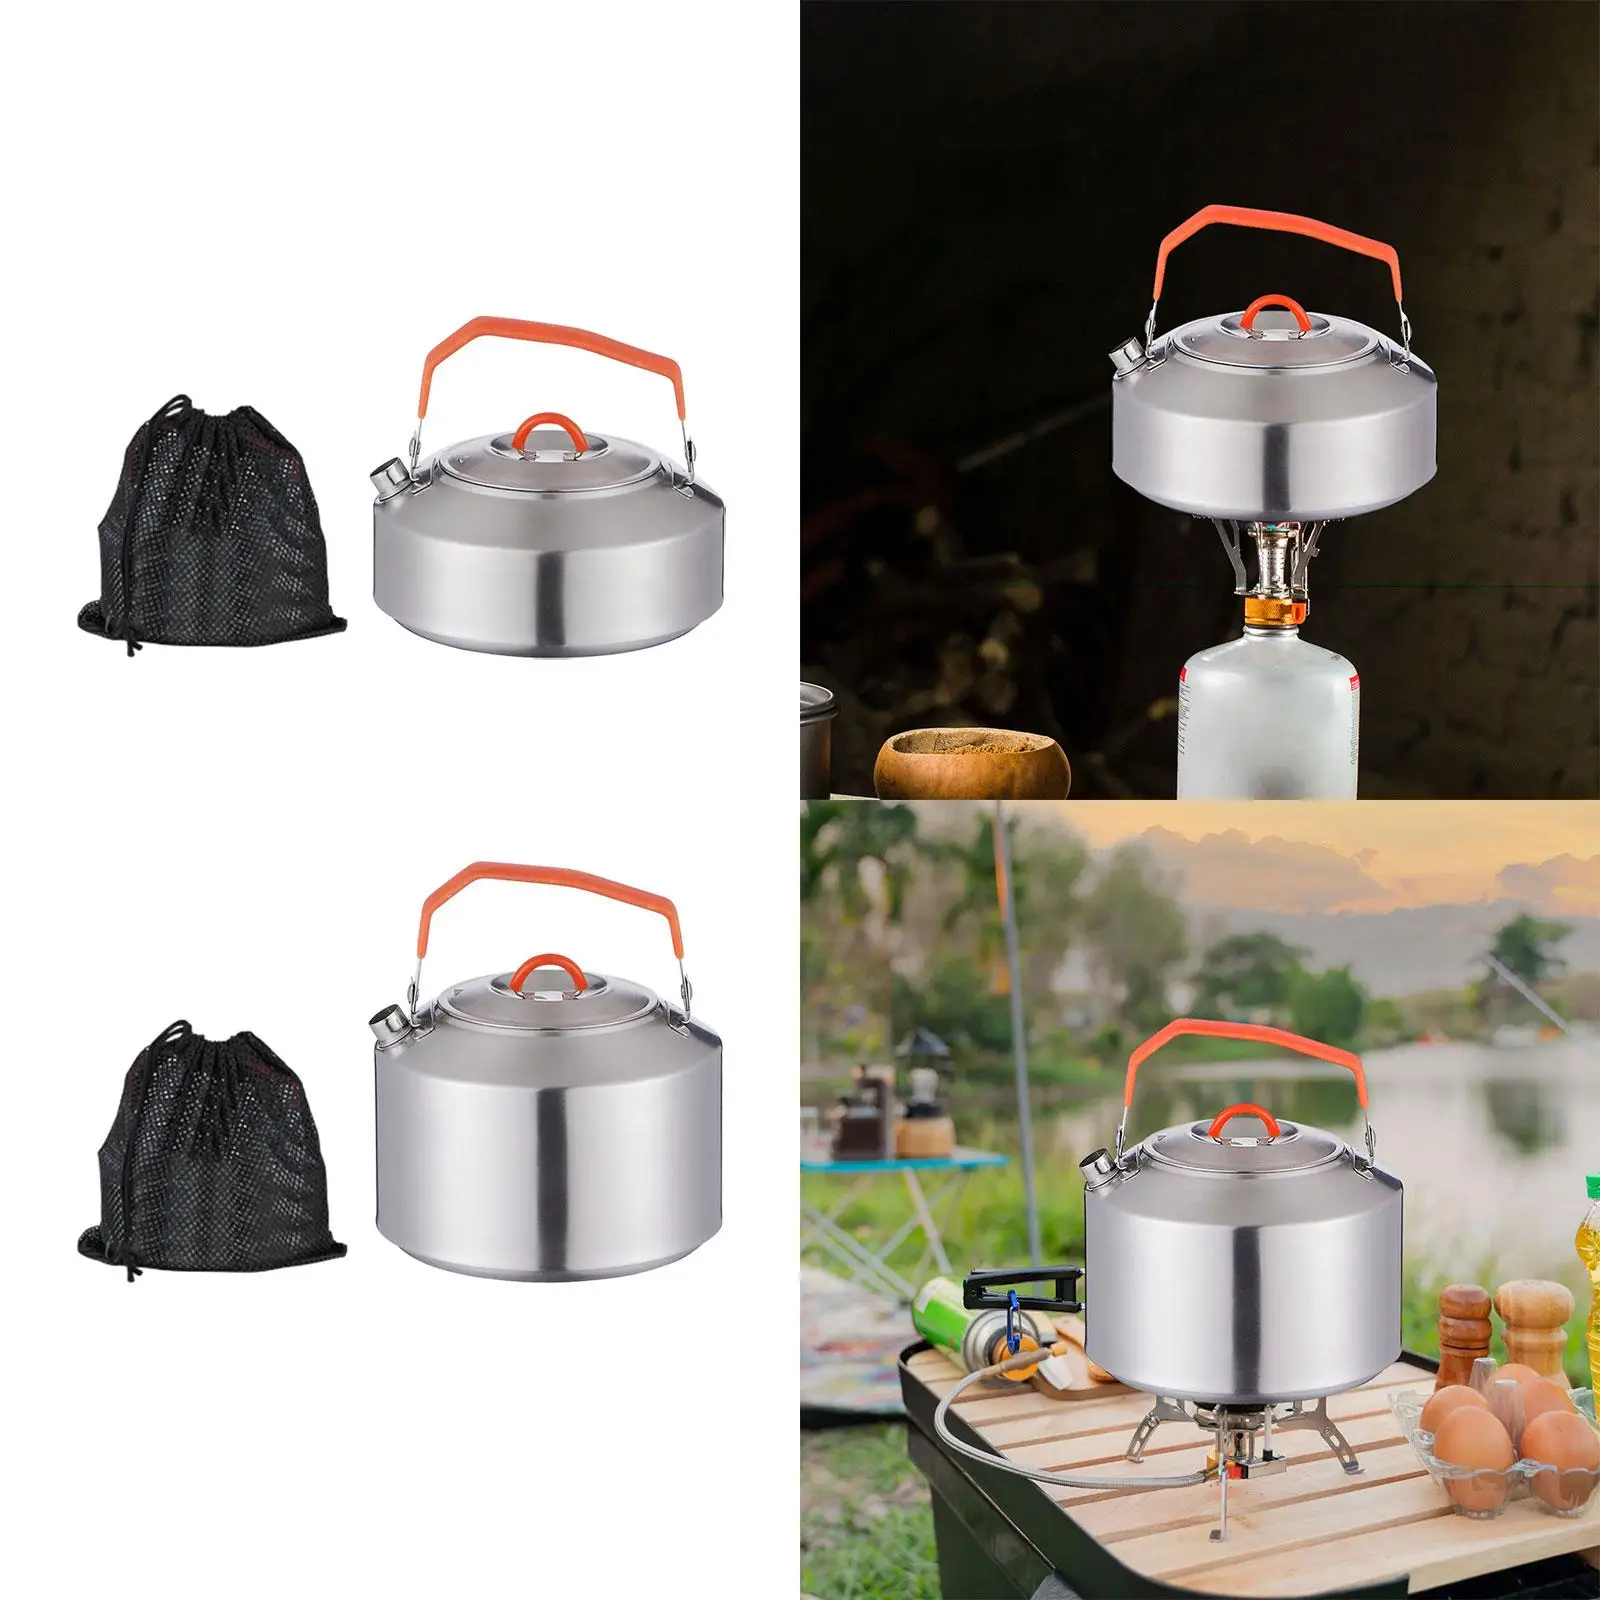 Camping Water Kettle Boiling Water Portable Camp Tea Pot Kitchenware Teapot for Travel Fishing Backpacking Mountaineering Hiking